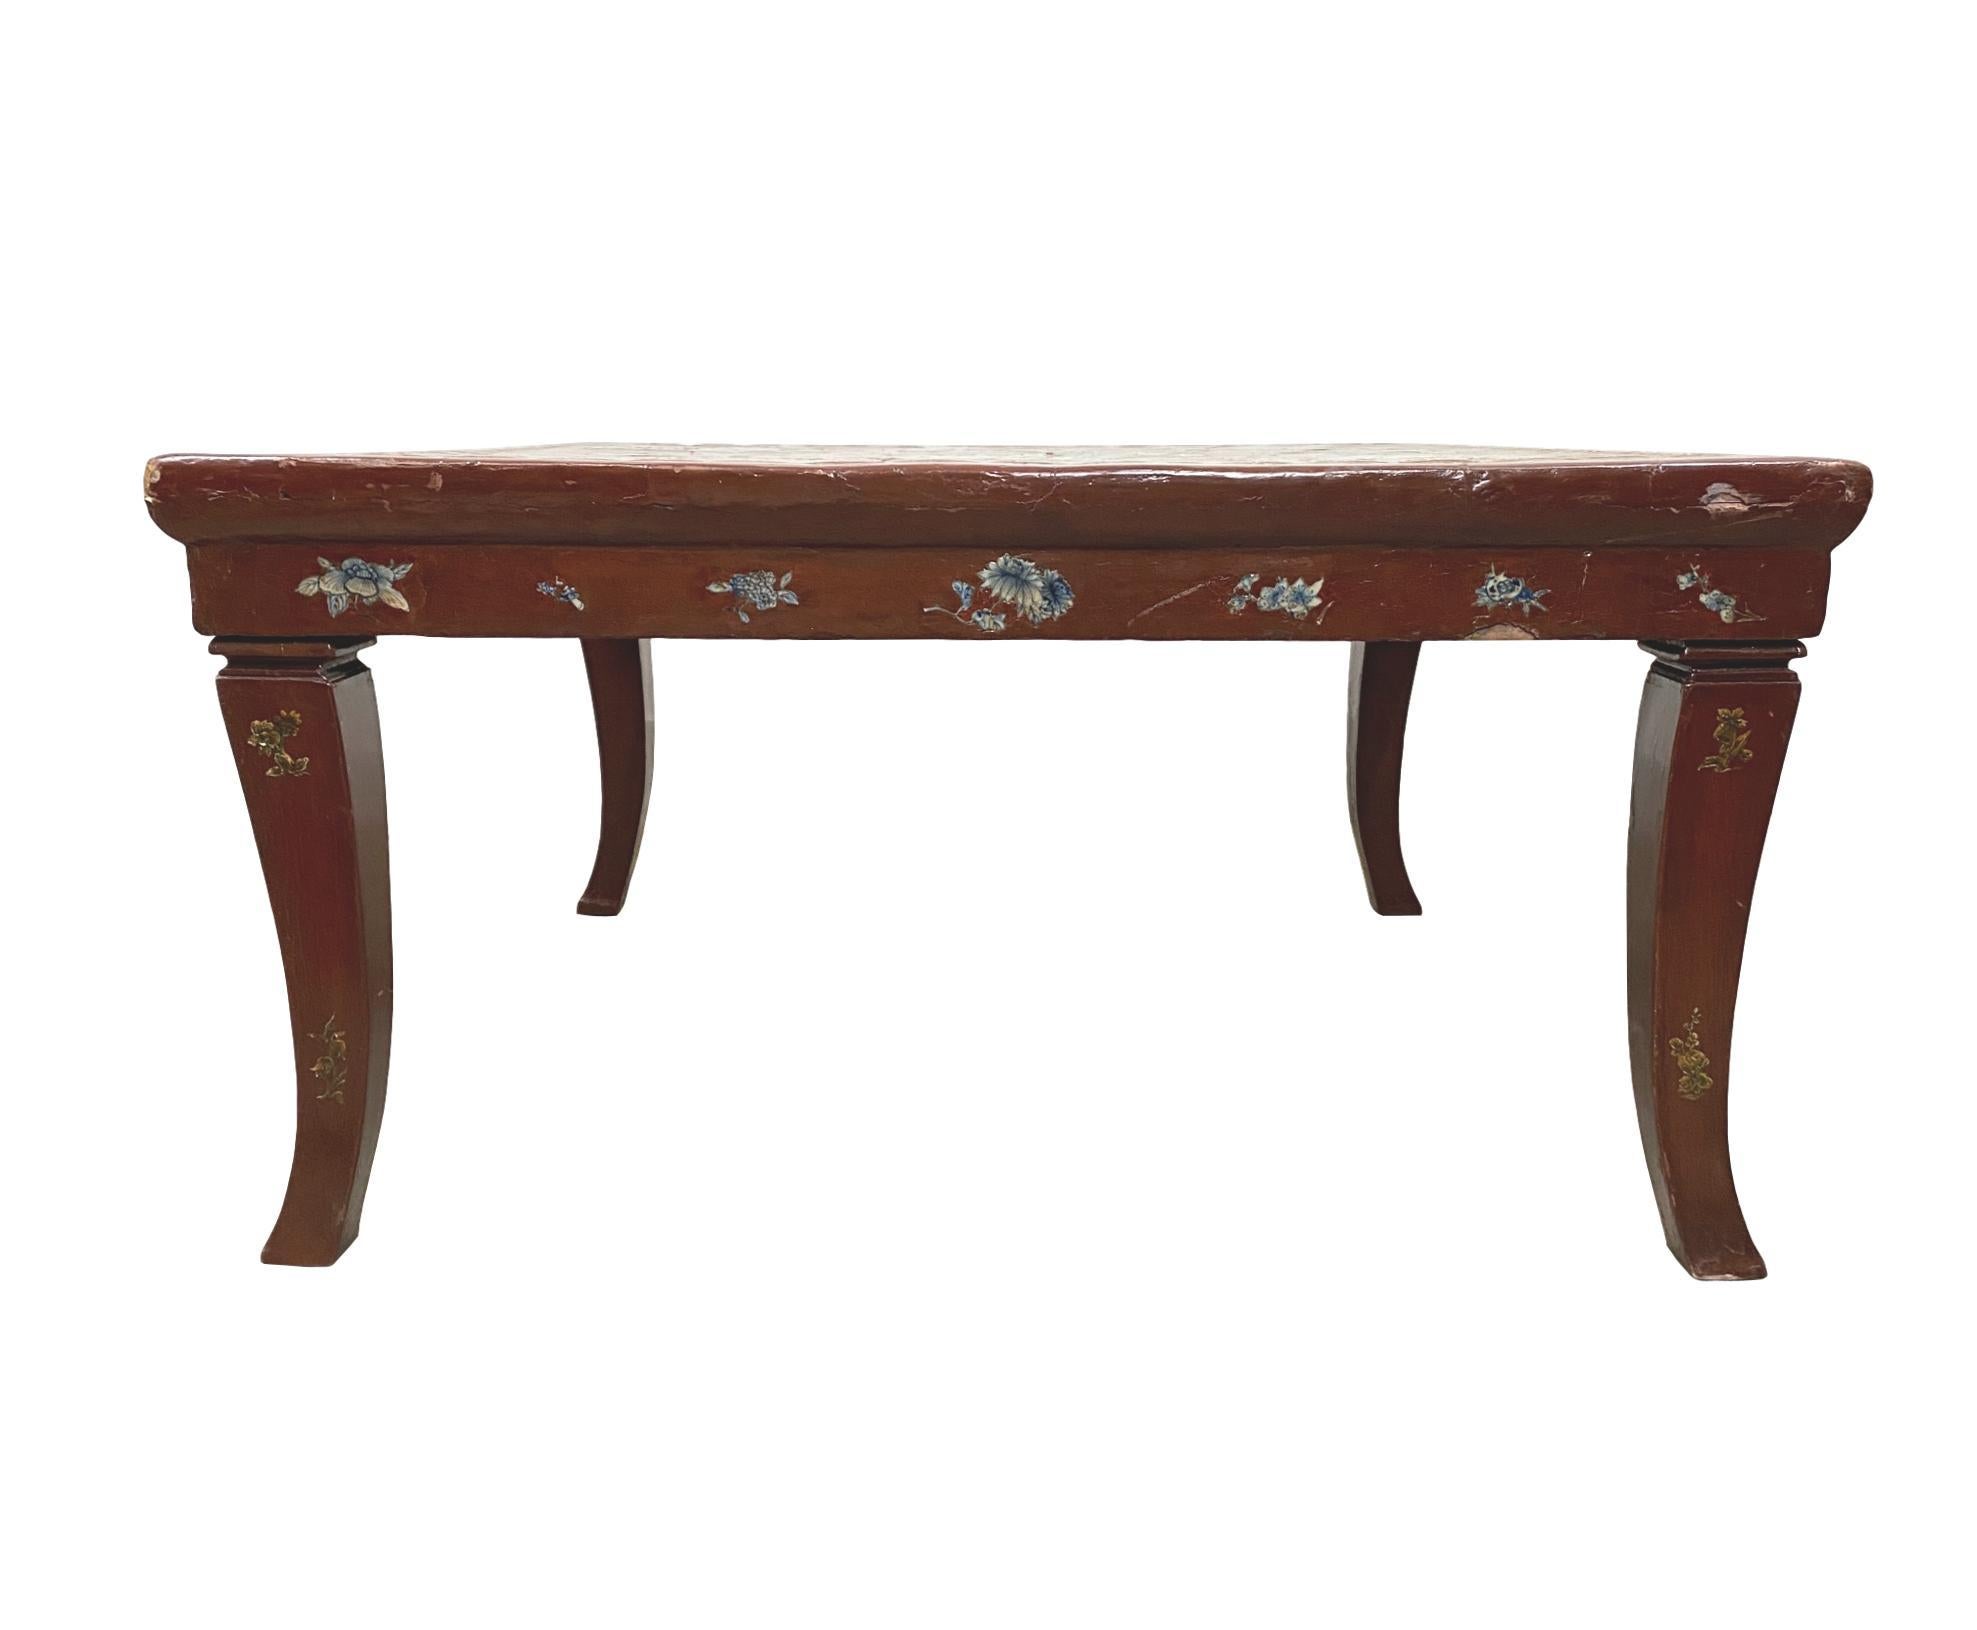 Qing Chinese Red Lacquered Kang Table with Blue and White Porcelain Inlays